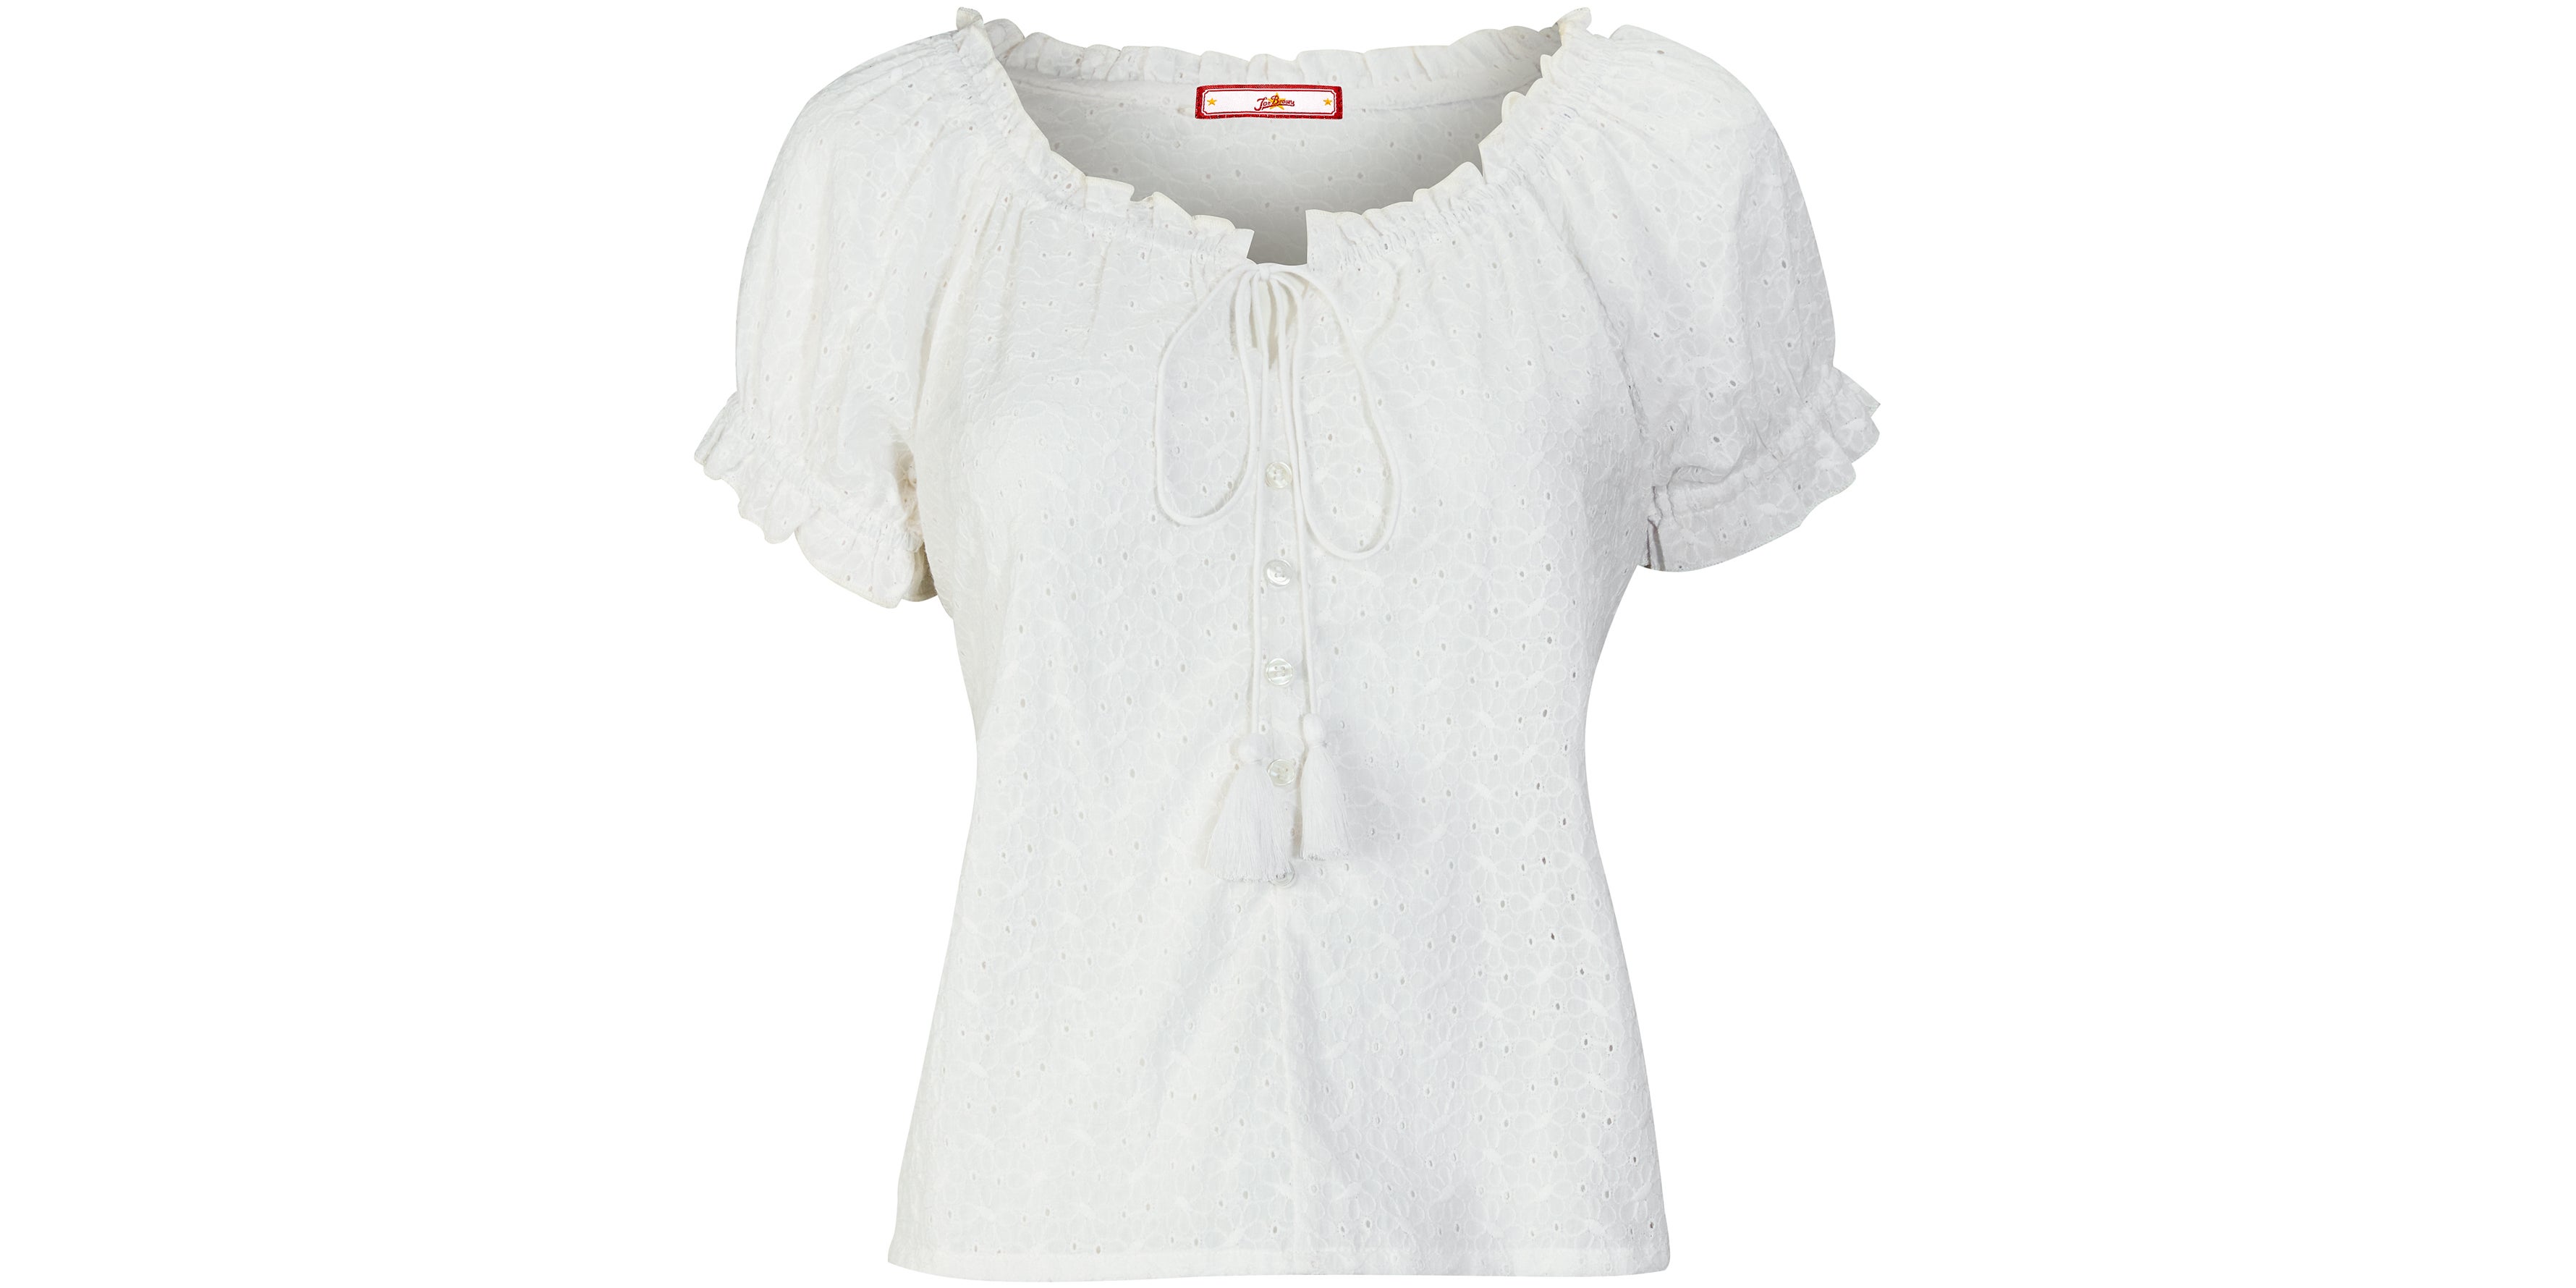 Joe Browns Broderie Anglaise Top in White, £35